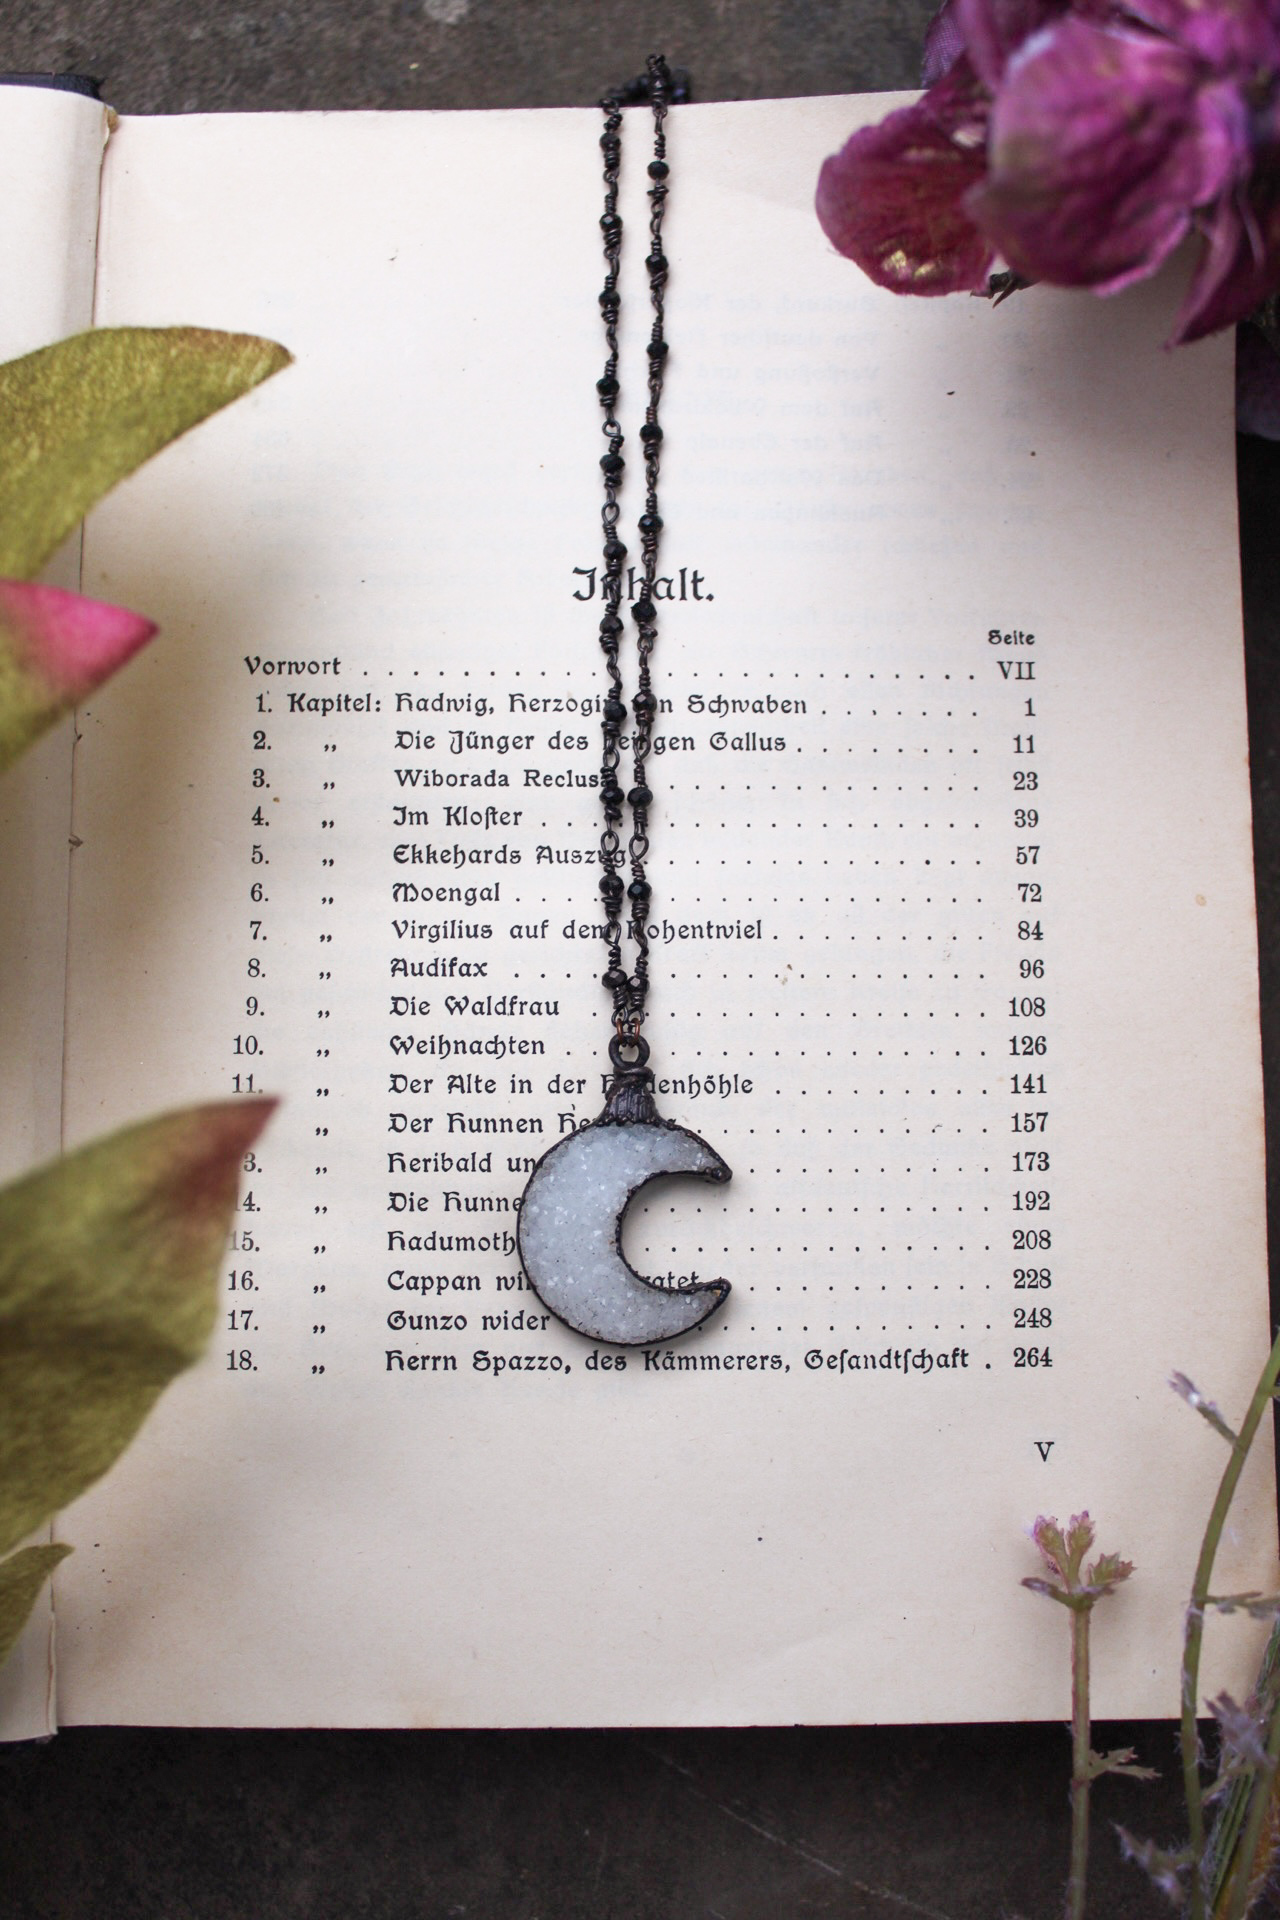 Sweet Dreams White Druzy Agate Crescent Moon Necklace